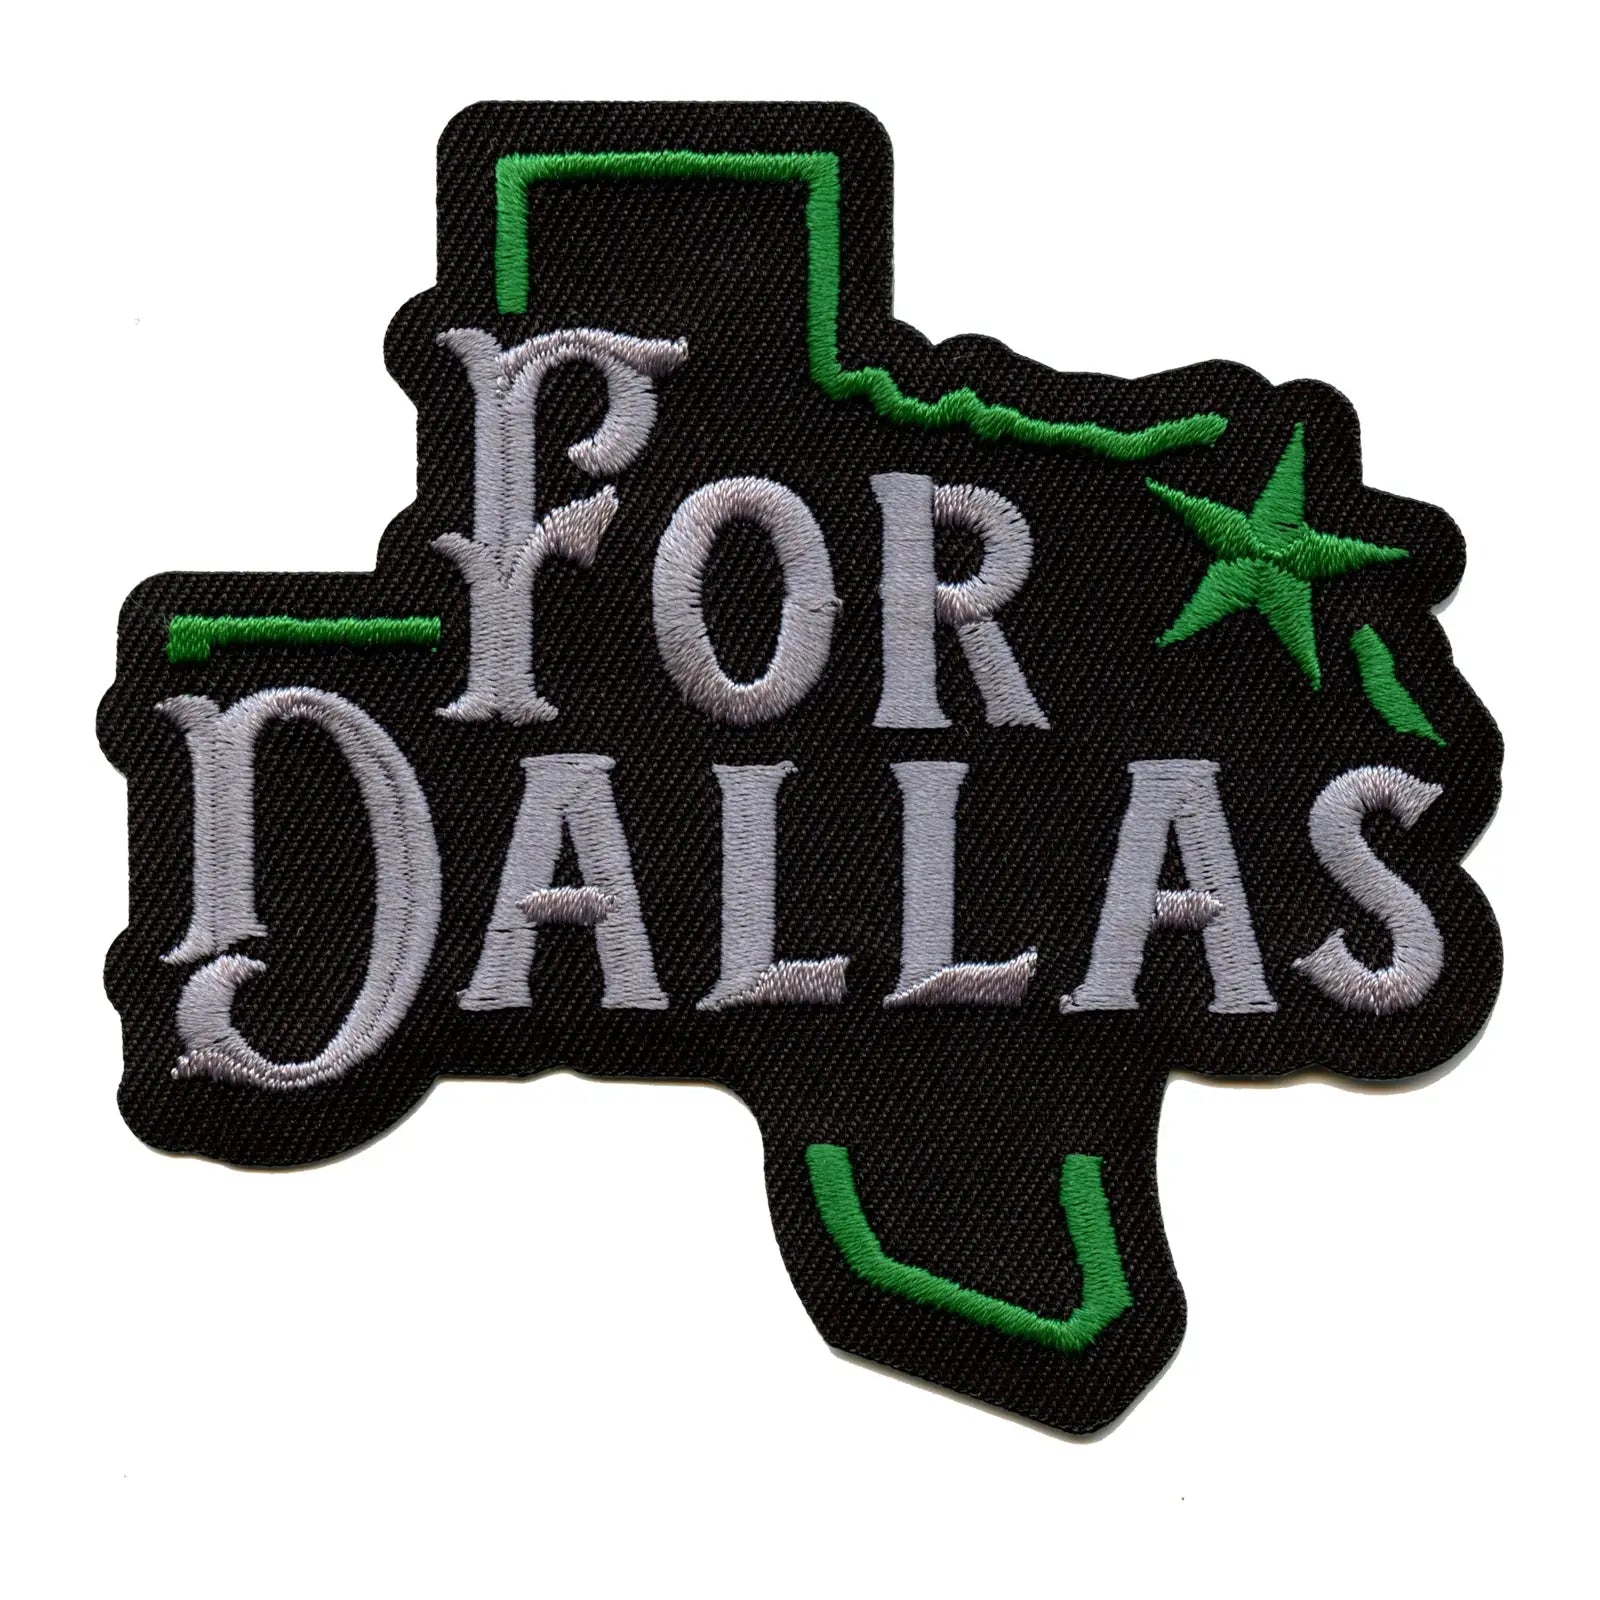 Accessories, Dallas Cowboys Iron On Patch Nfl Football Team Diy